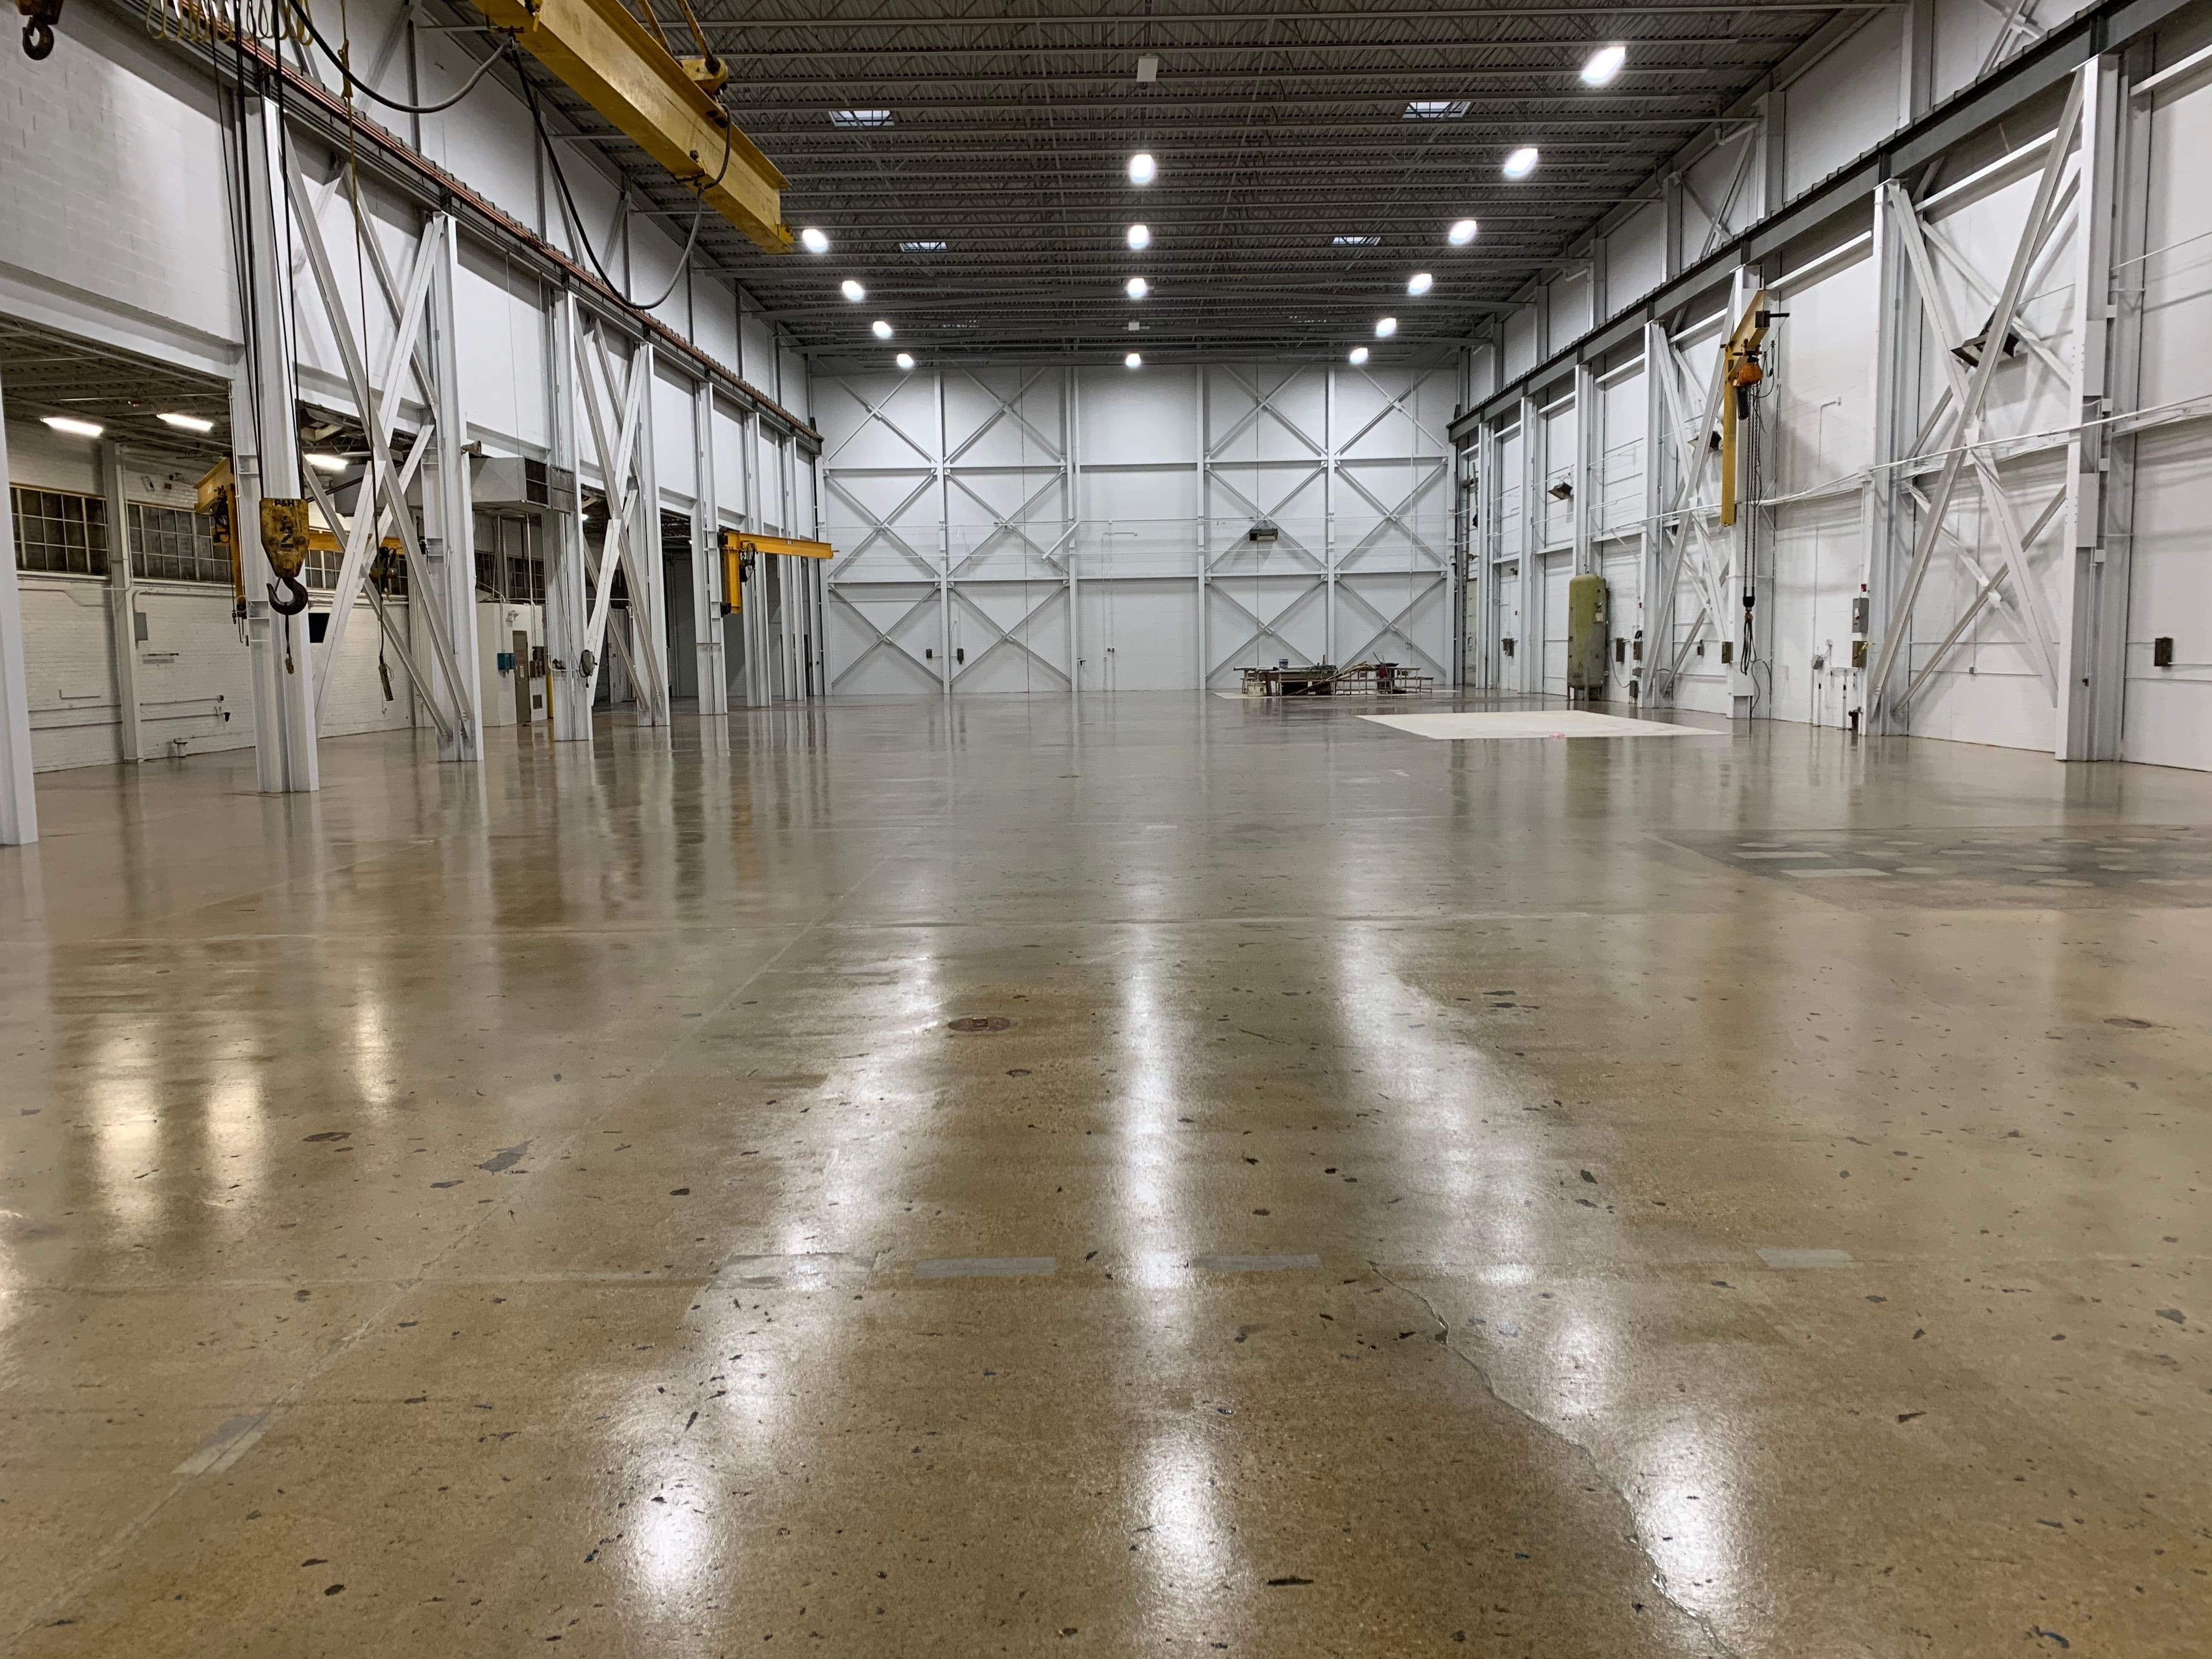 Concrete scrubbing is a great way to clean a warehouse floor. 